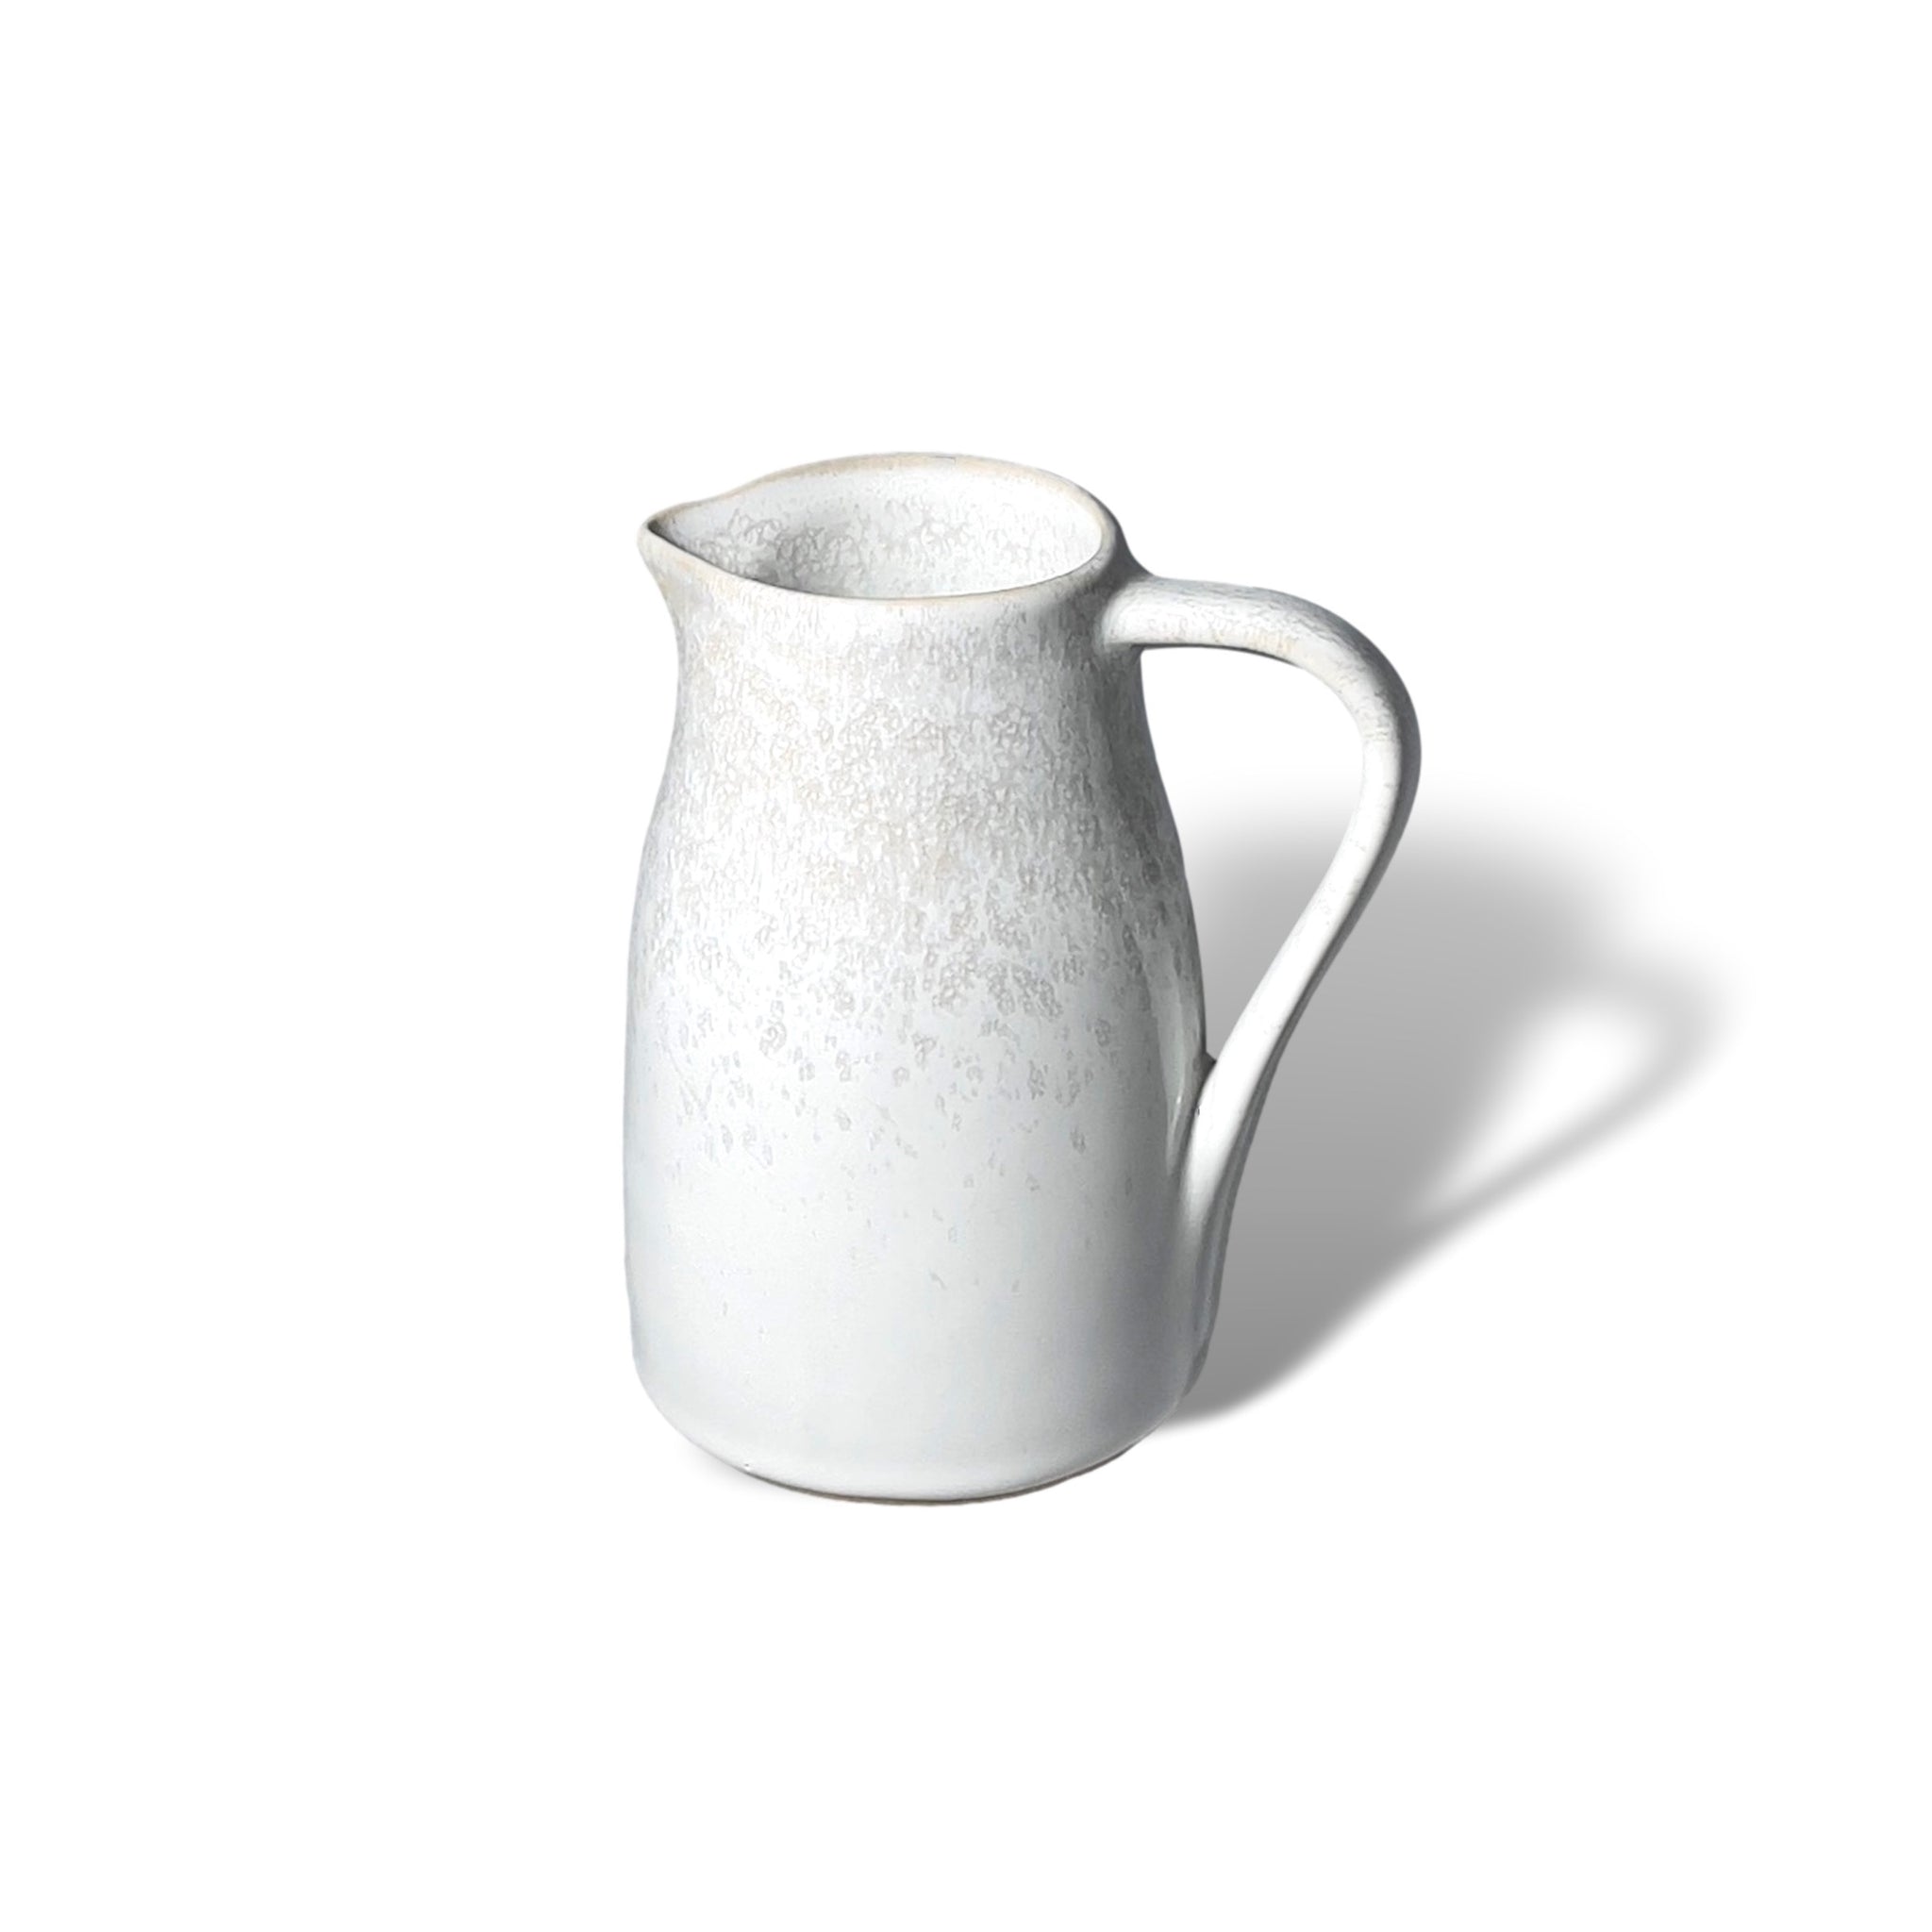 Lily Valley Creamer/Pitcher